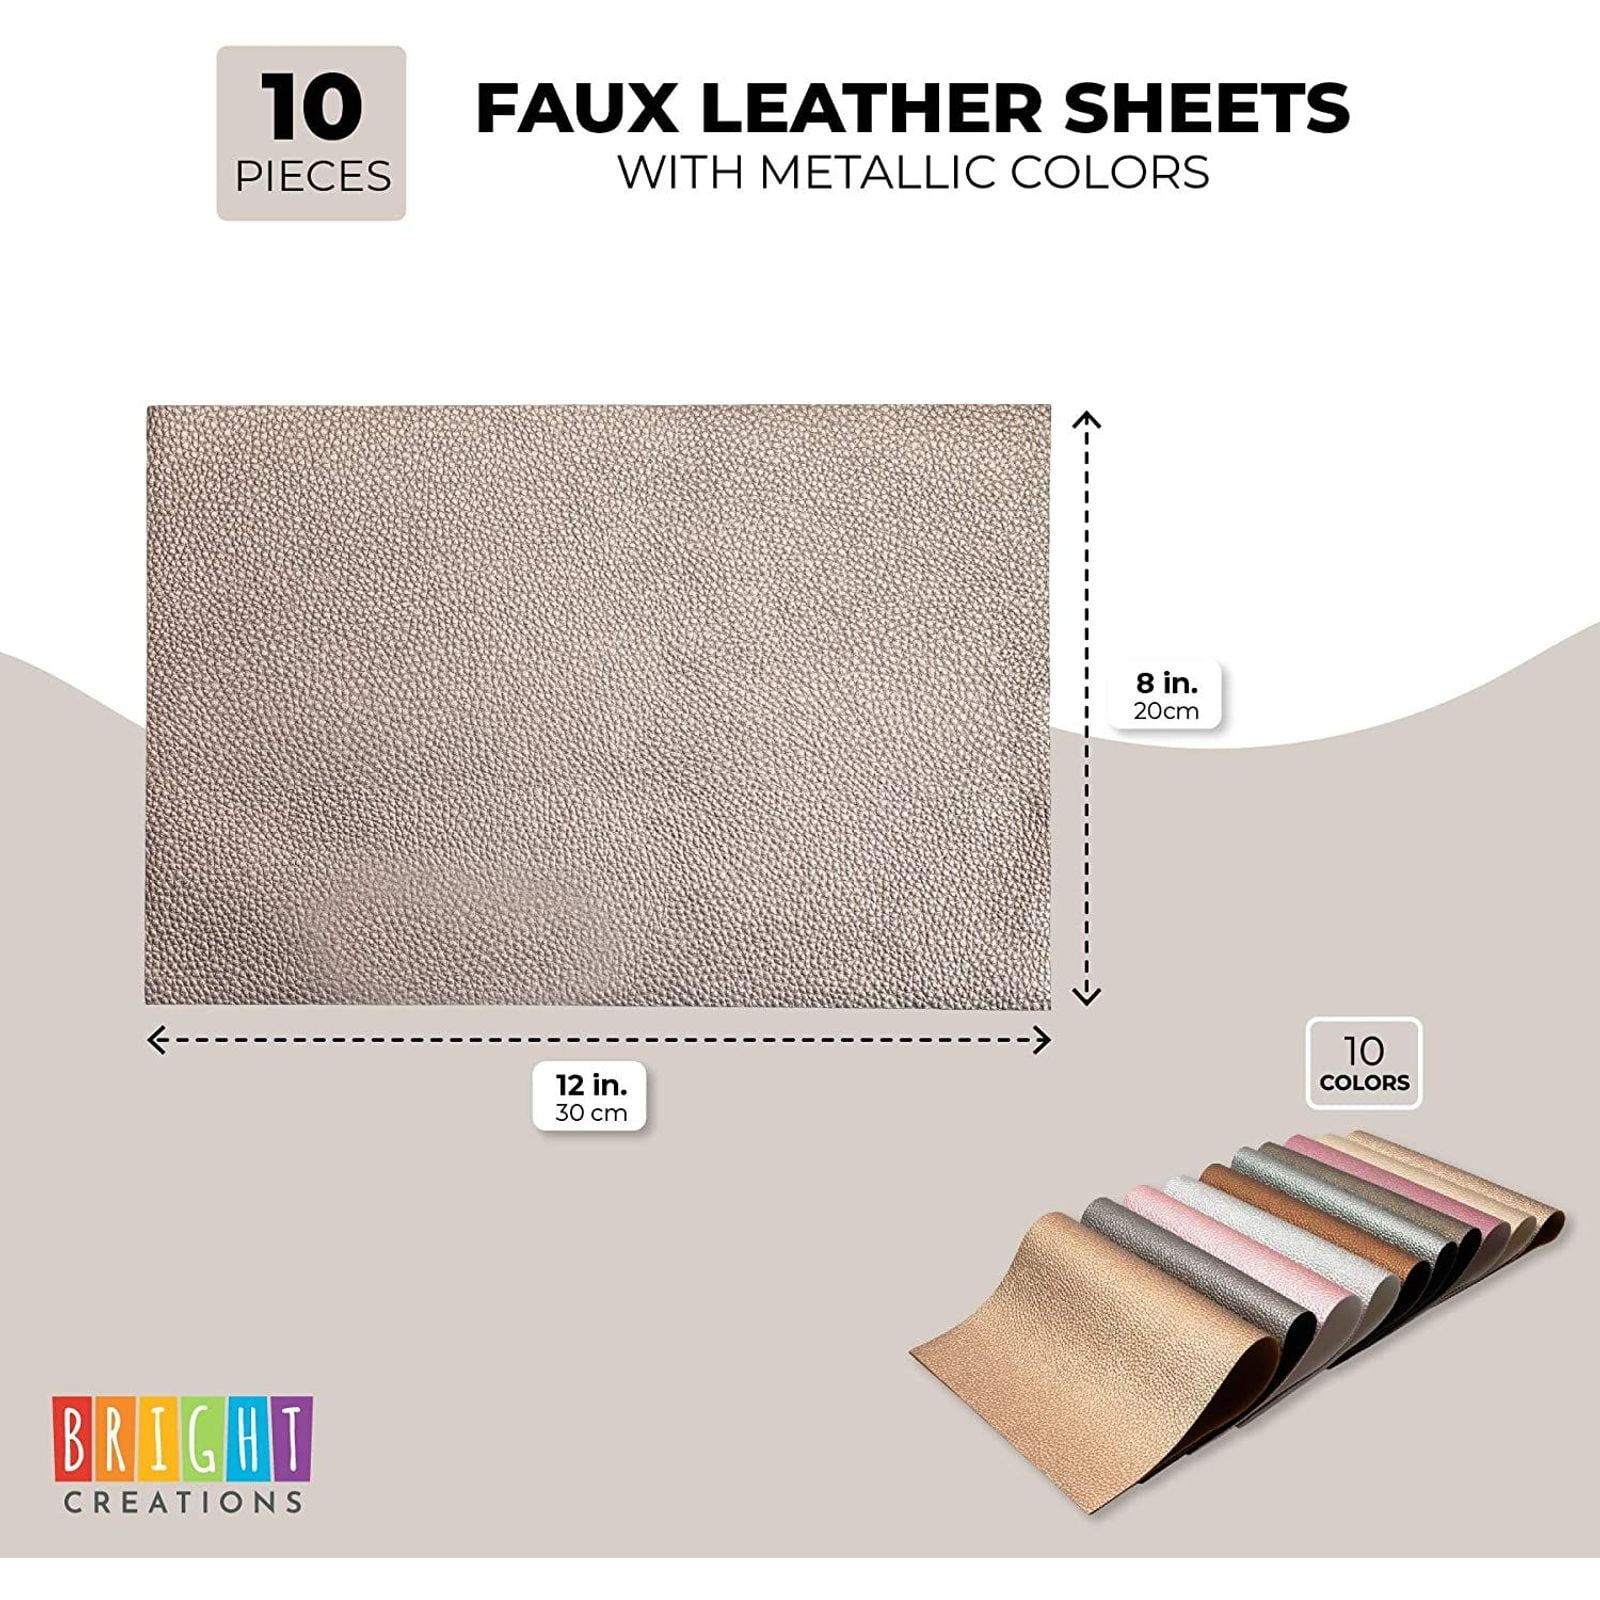 Faux Leather Sheets for Crafts, 16pcs/set Leather Fabric 8.3 x 12(21cm x 30cm) A4 Synthetic Leather Fabric Sheets for Leather Crafts Leather